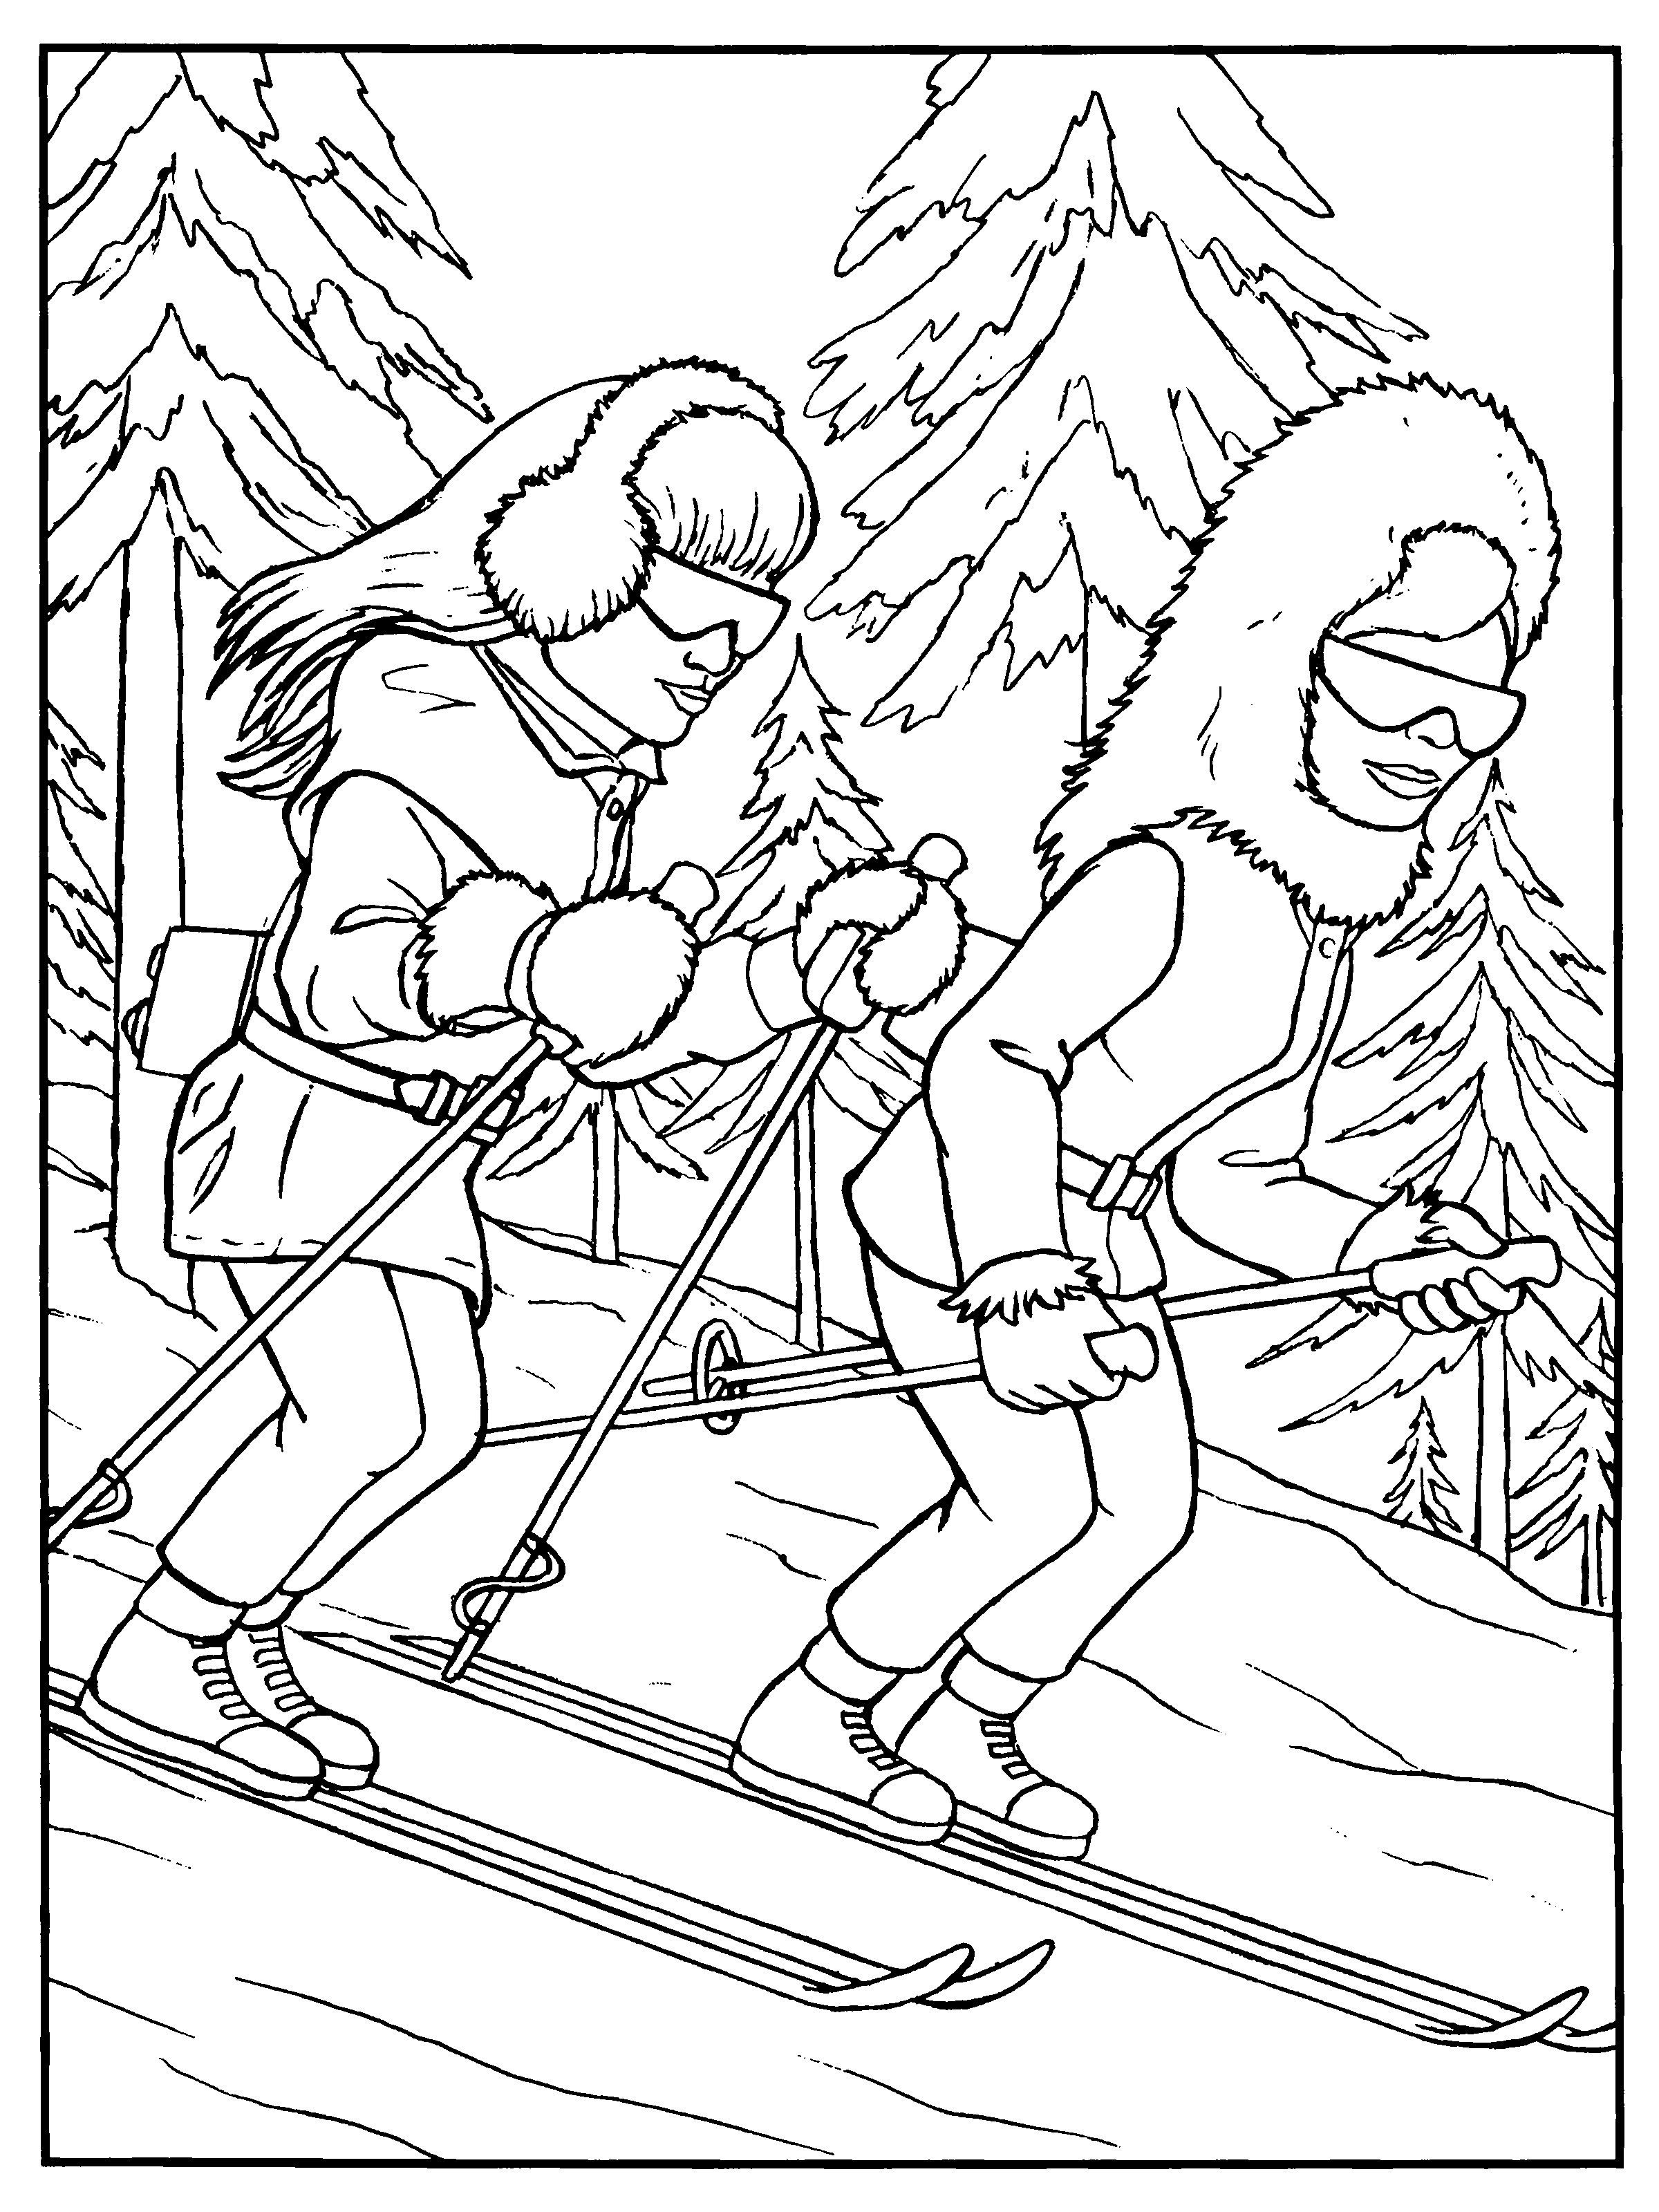 animated-coloring-pages-thunderbirds-image-0022